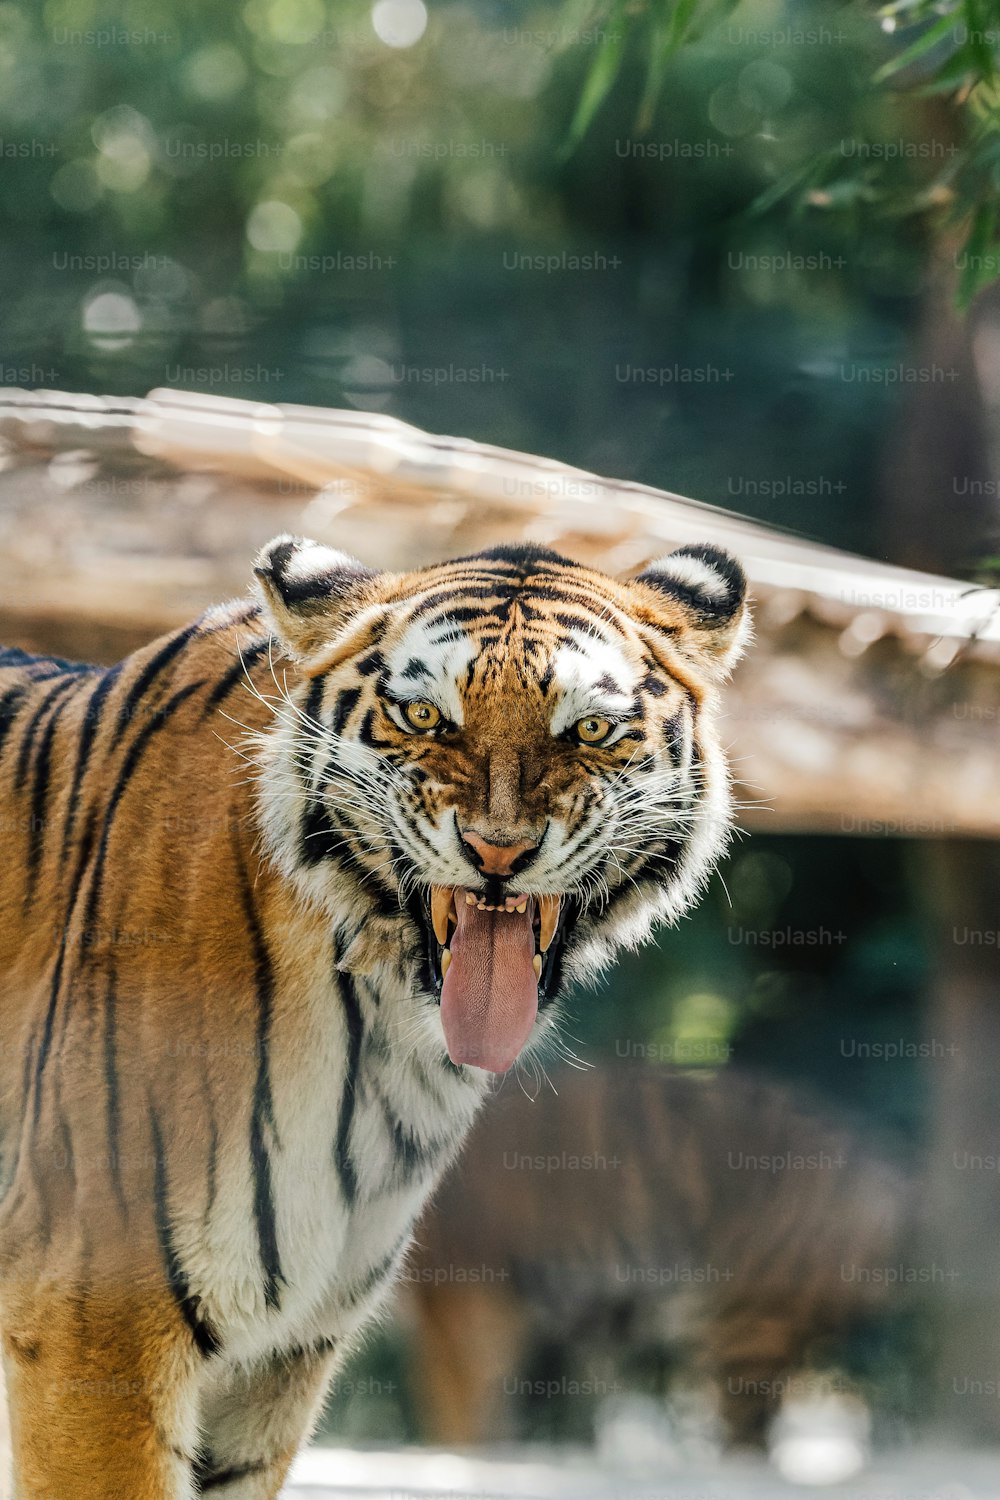 a tiger with its tongue out